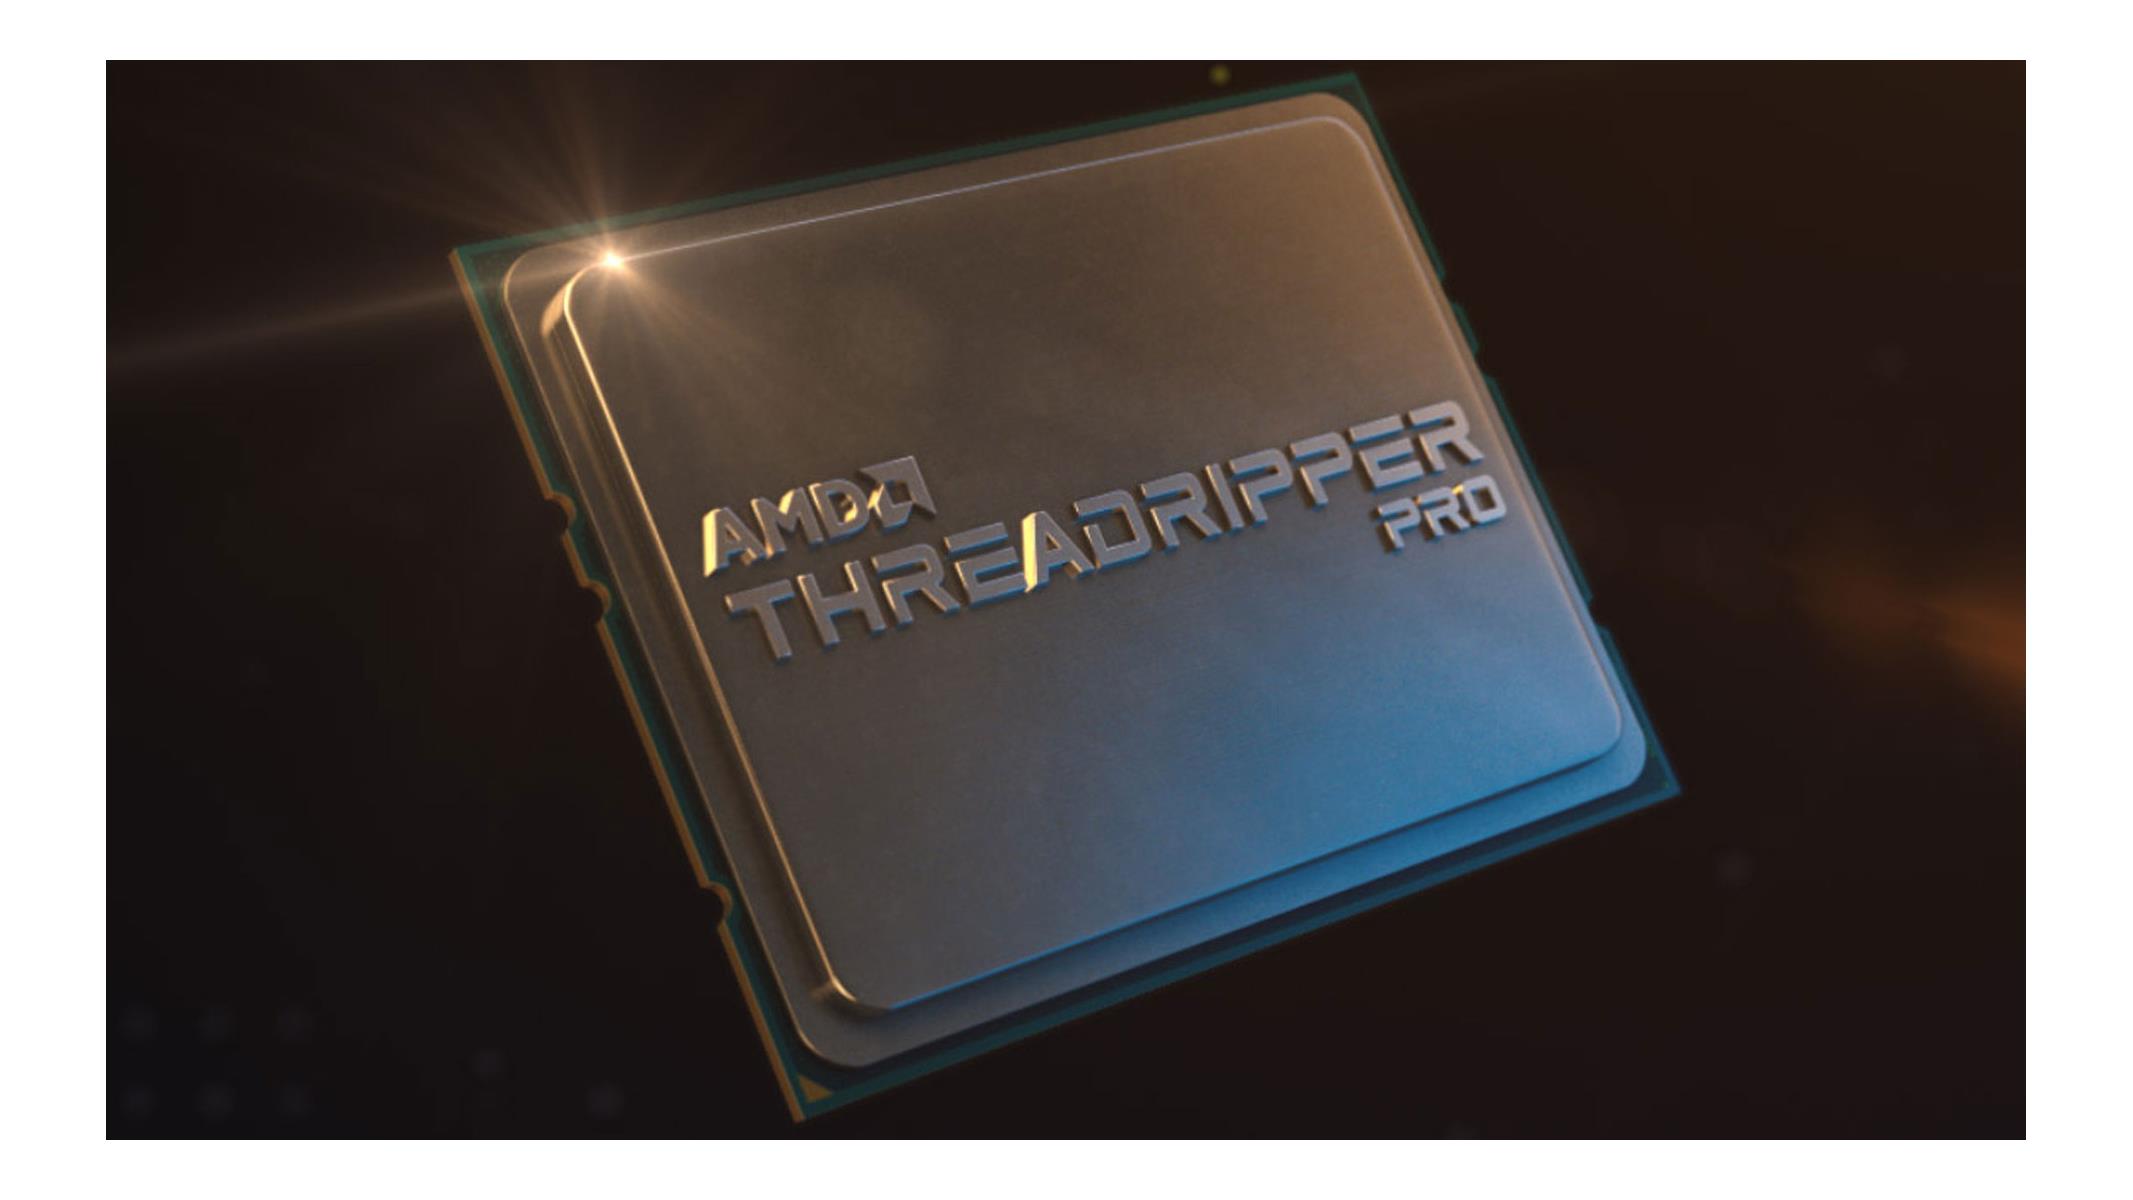 AMD's preposterous Threadripper Pro price tag holds its 128-thread monster  back from greatness